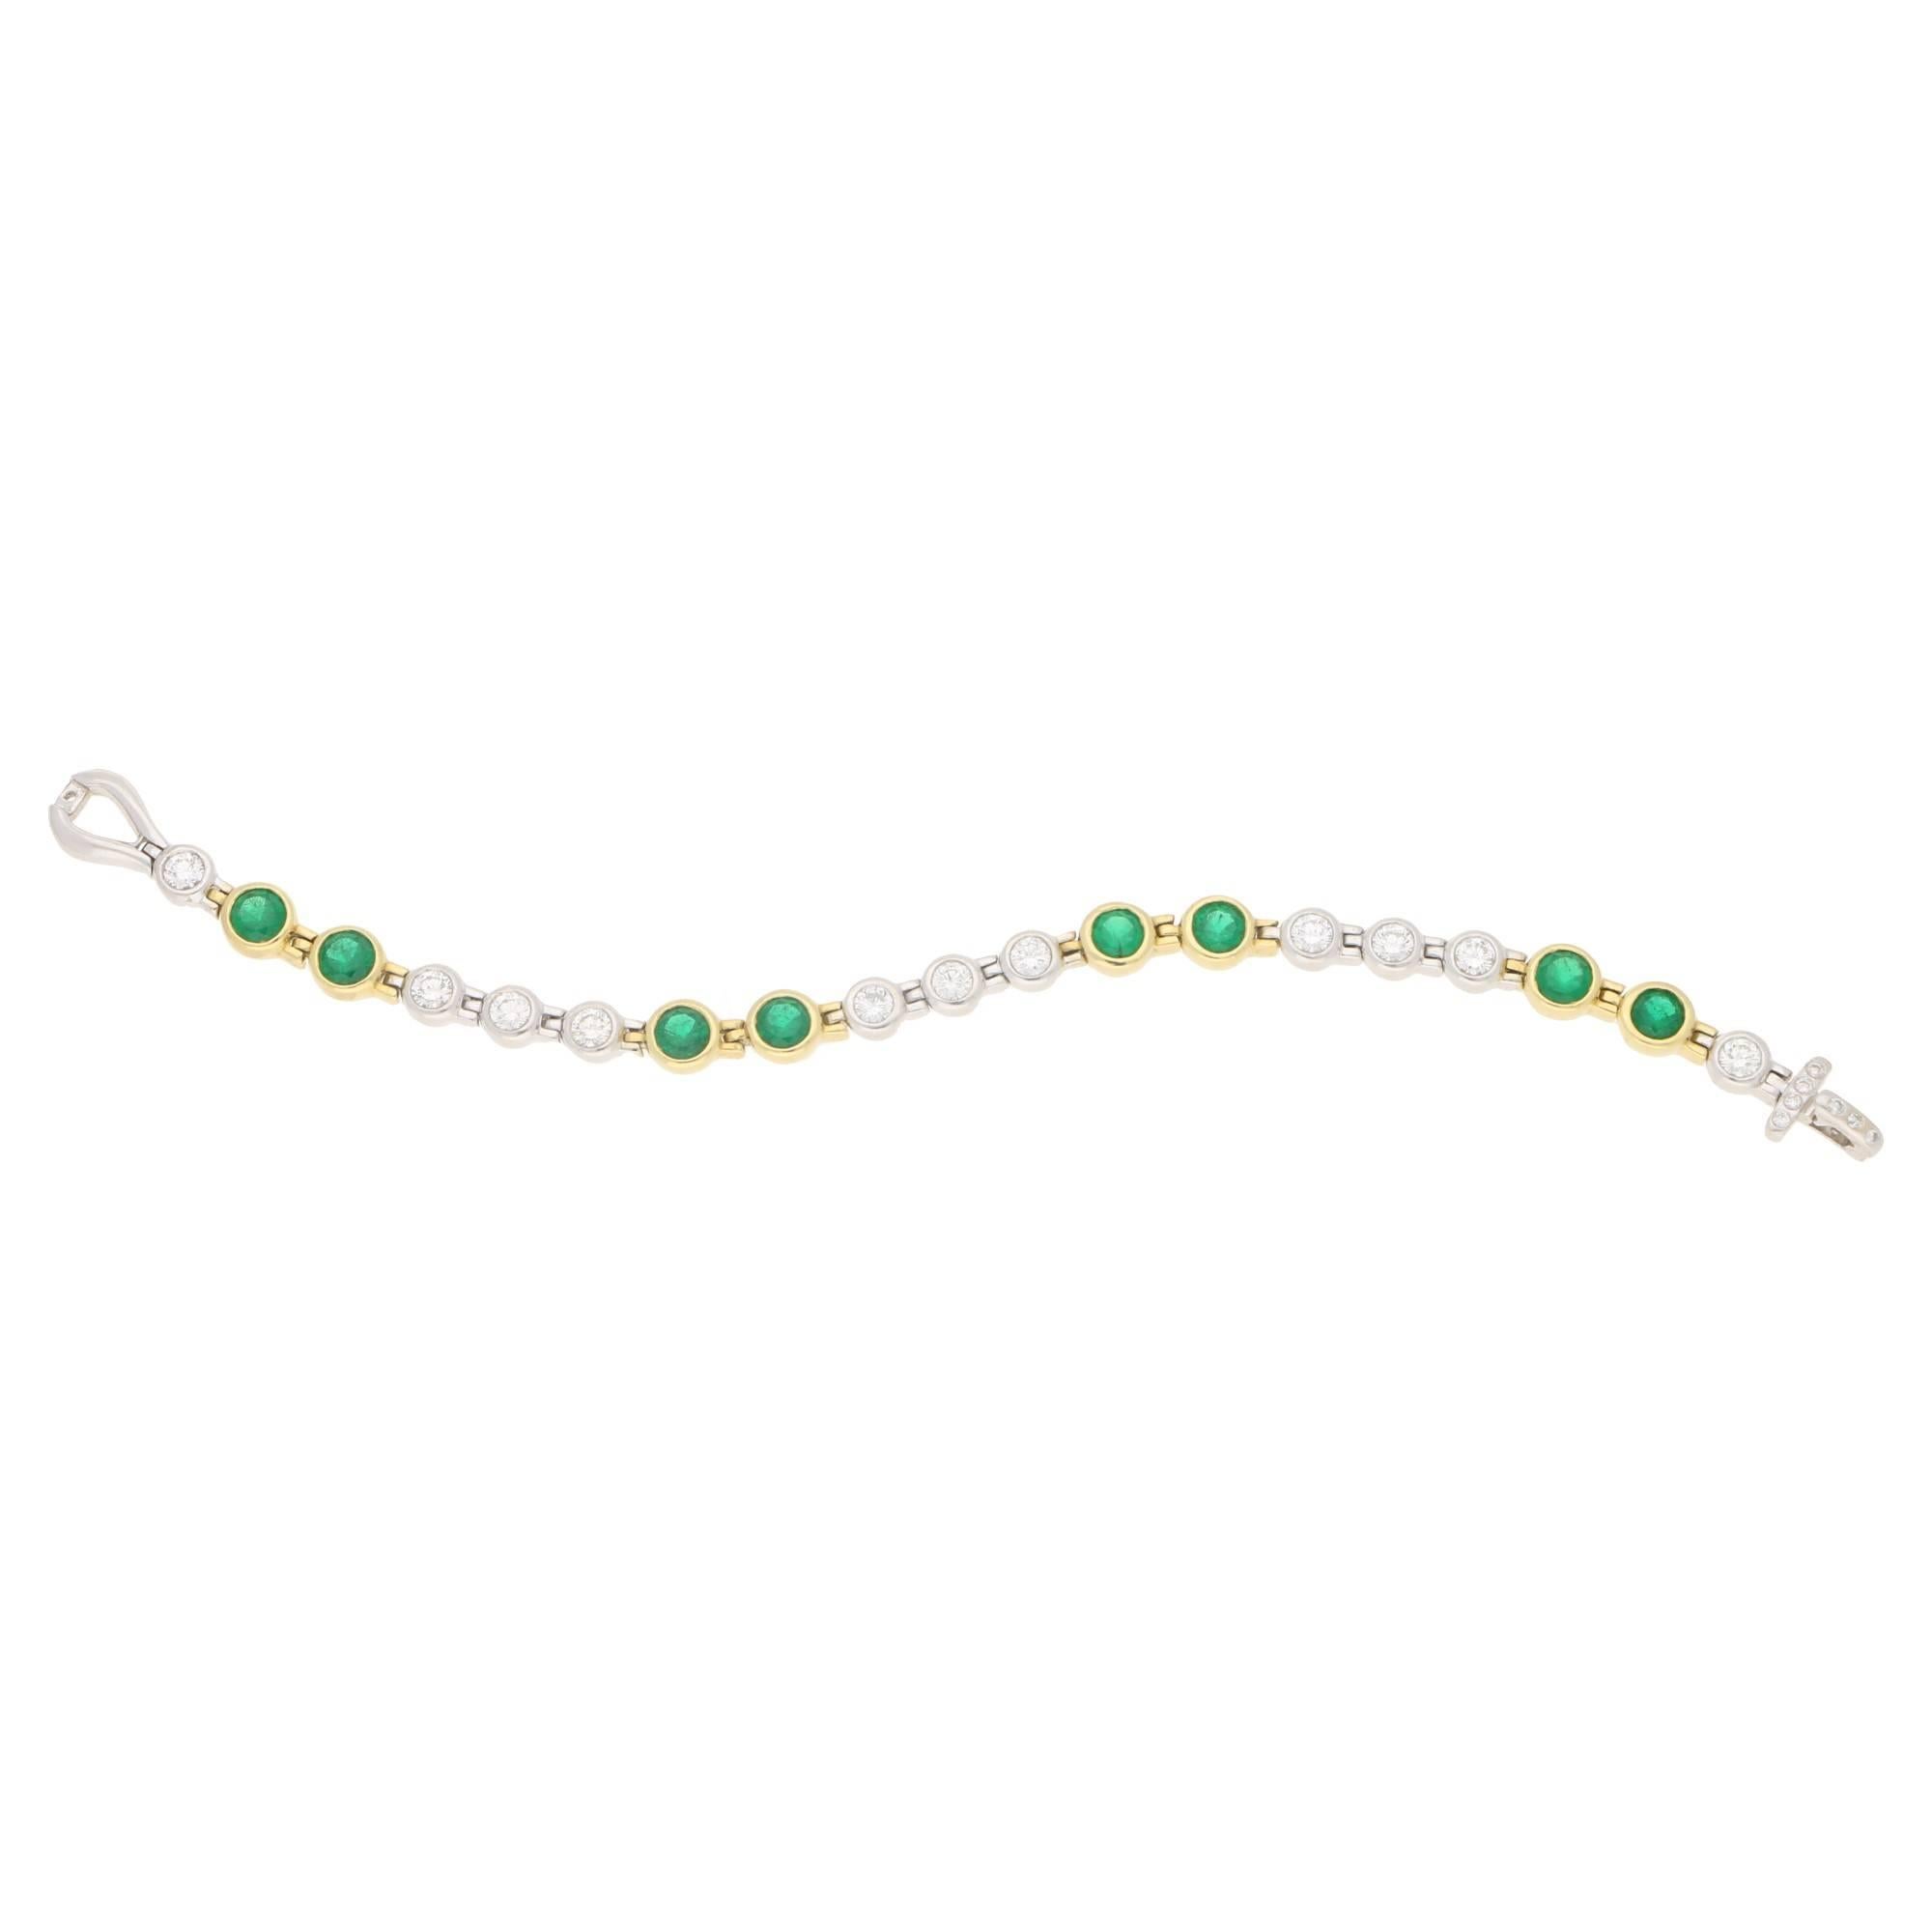 Estimated total diamond weight: 3.63 carats, estimated total emerald weight: 3.52 carats.
A stylish vintage emerald and diamond line bracelet. 
The rub-over set bracelet is formed of eleven round brilliant cut diamonds set into 18 carat white gold